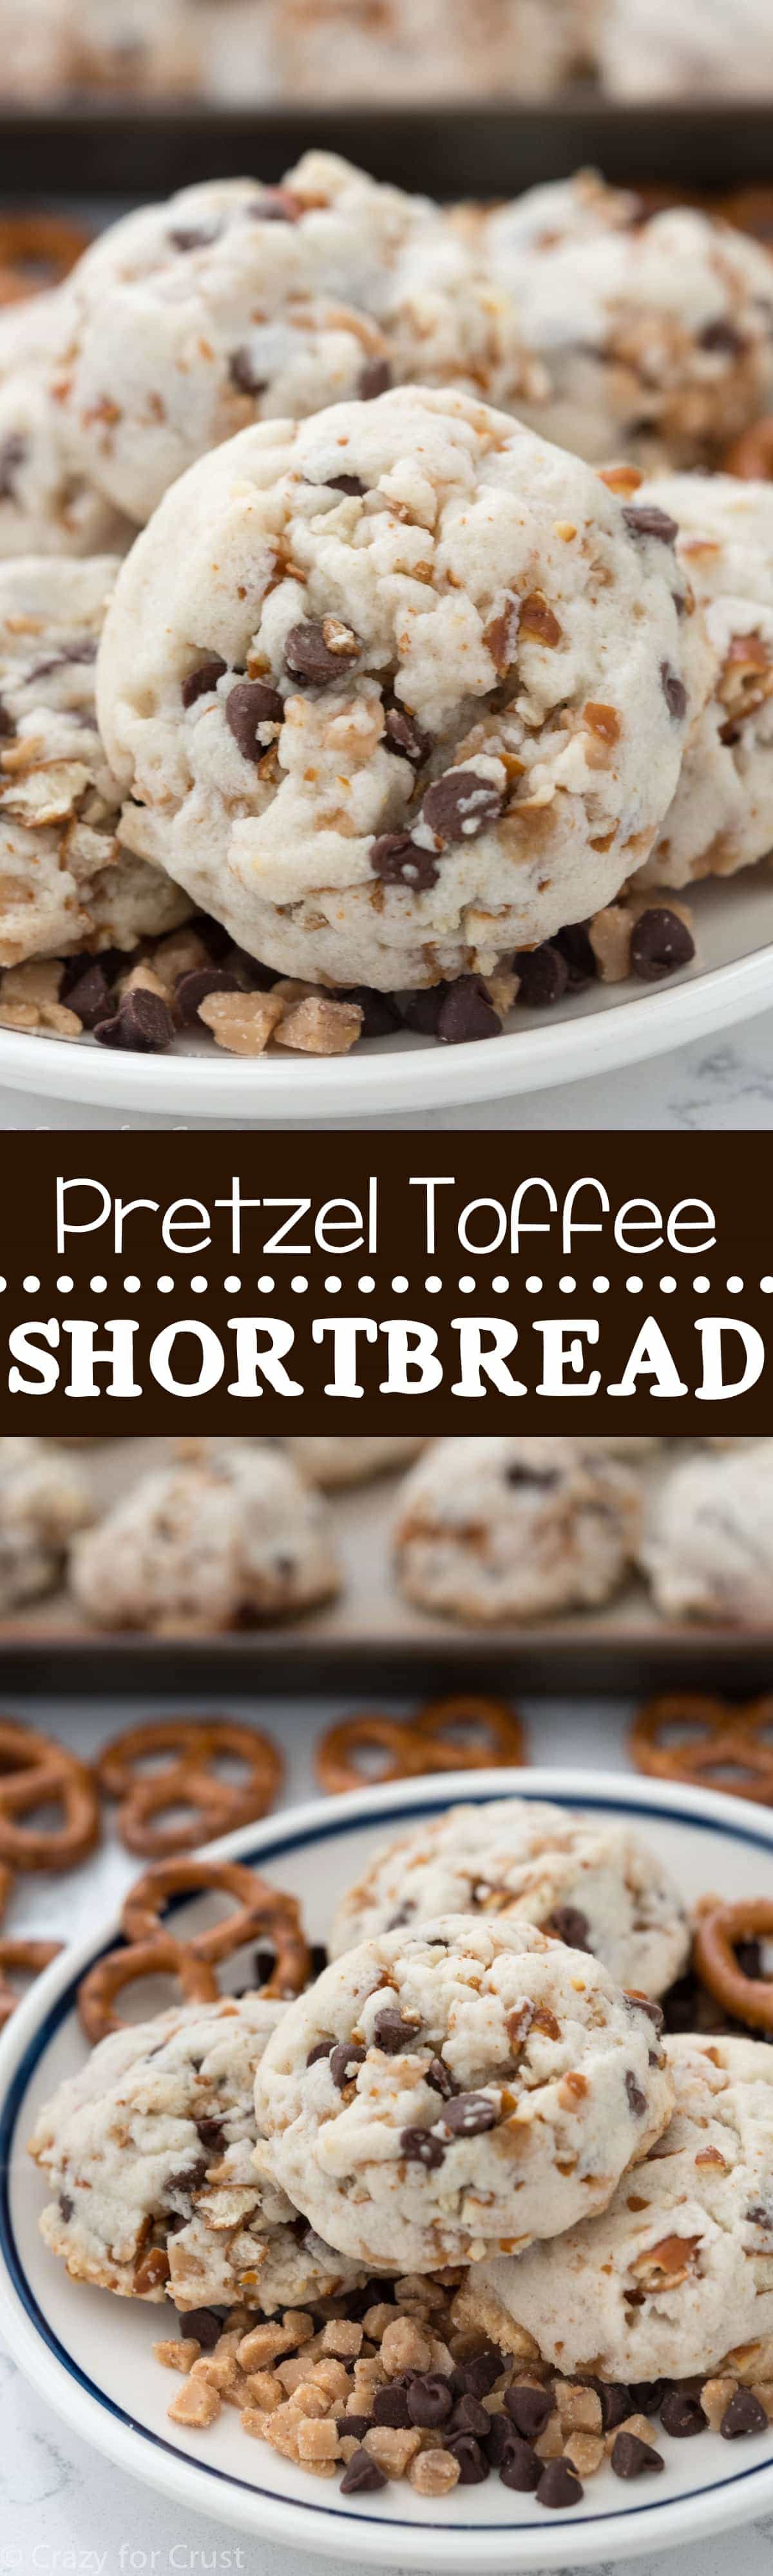 Pretzel Toffee Shortbread Cookies - these easy cookies have just 5 ingredients! Fast and foolproof, they're the BEST cookie ever!